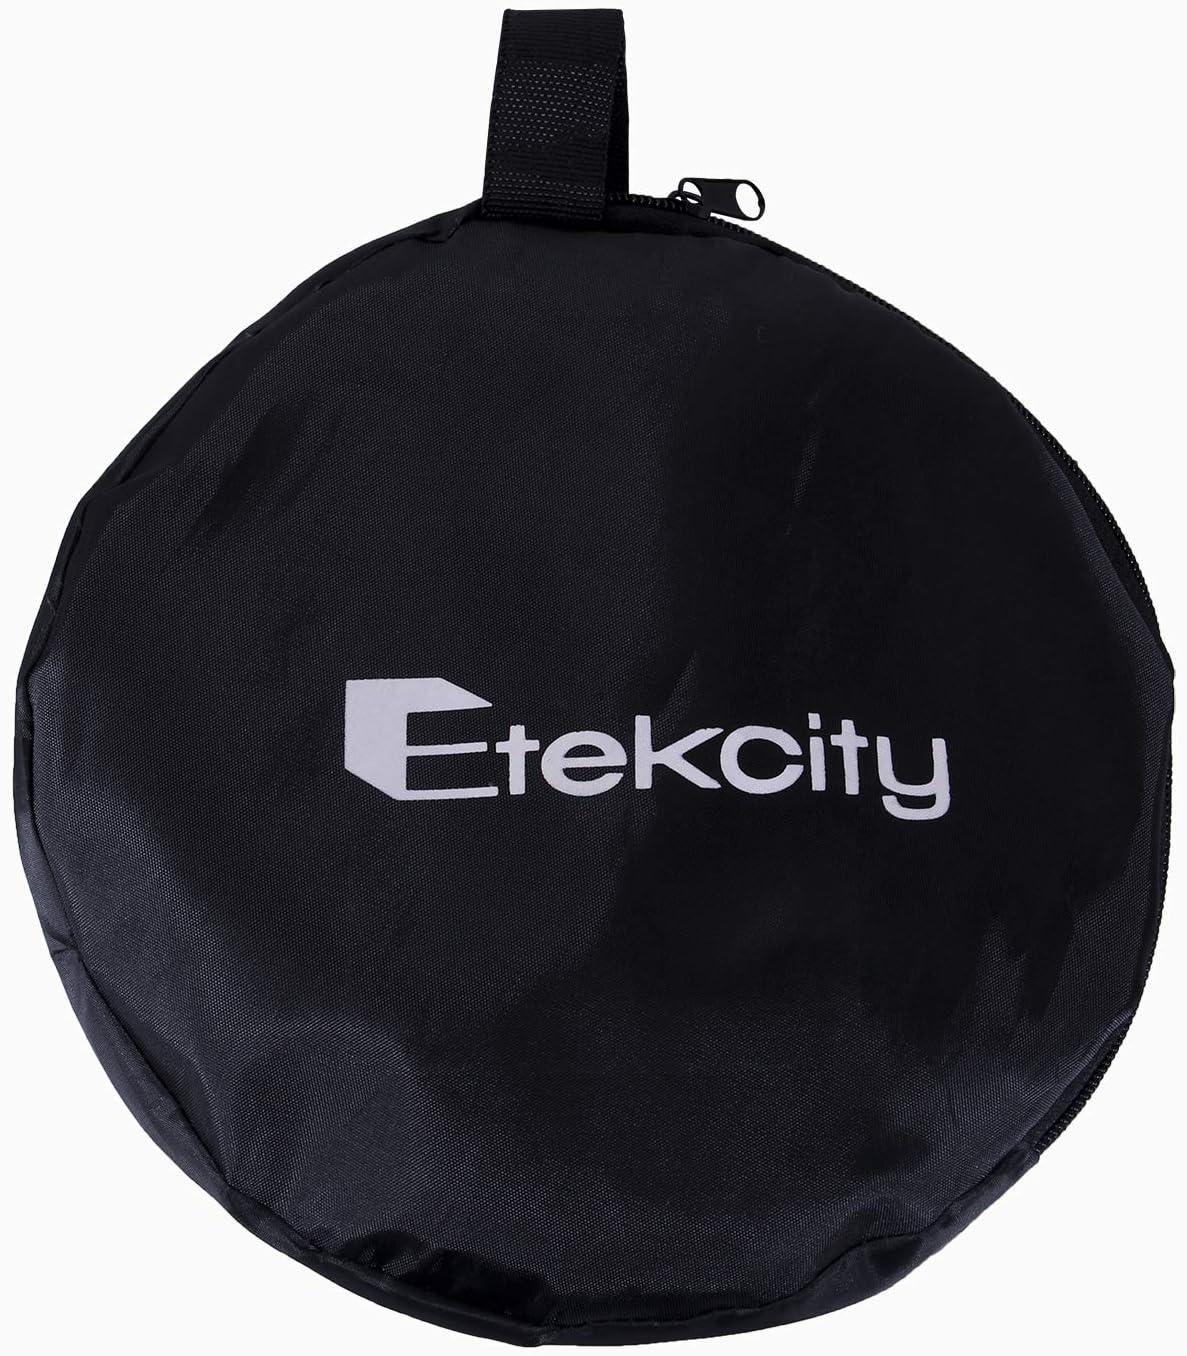 Etekcity 24 (60cm) 5-in-1 Photography Reflector Light Reflectors for Photography  Multi-Disc Photo Reflector Collapsible with Bag - Translucent, Silver,  Gold, White and Black 24 Inch